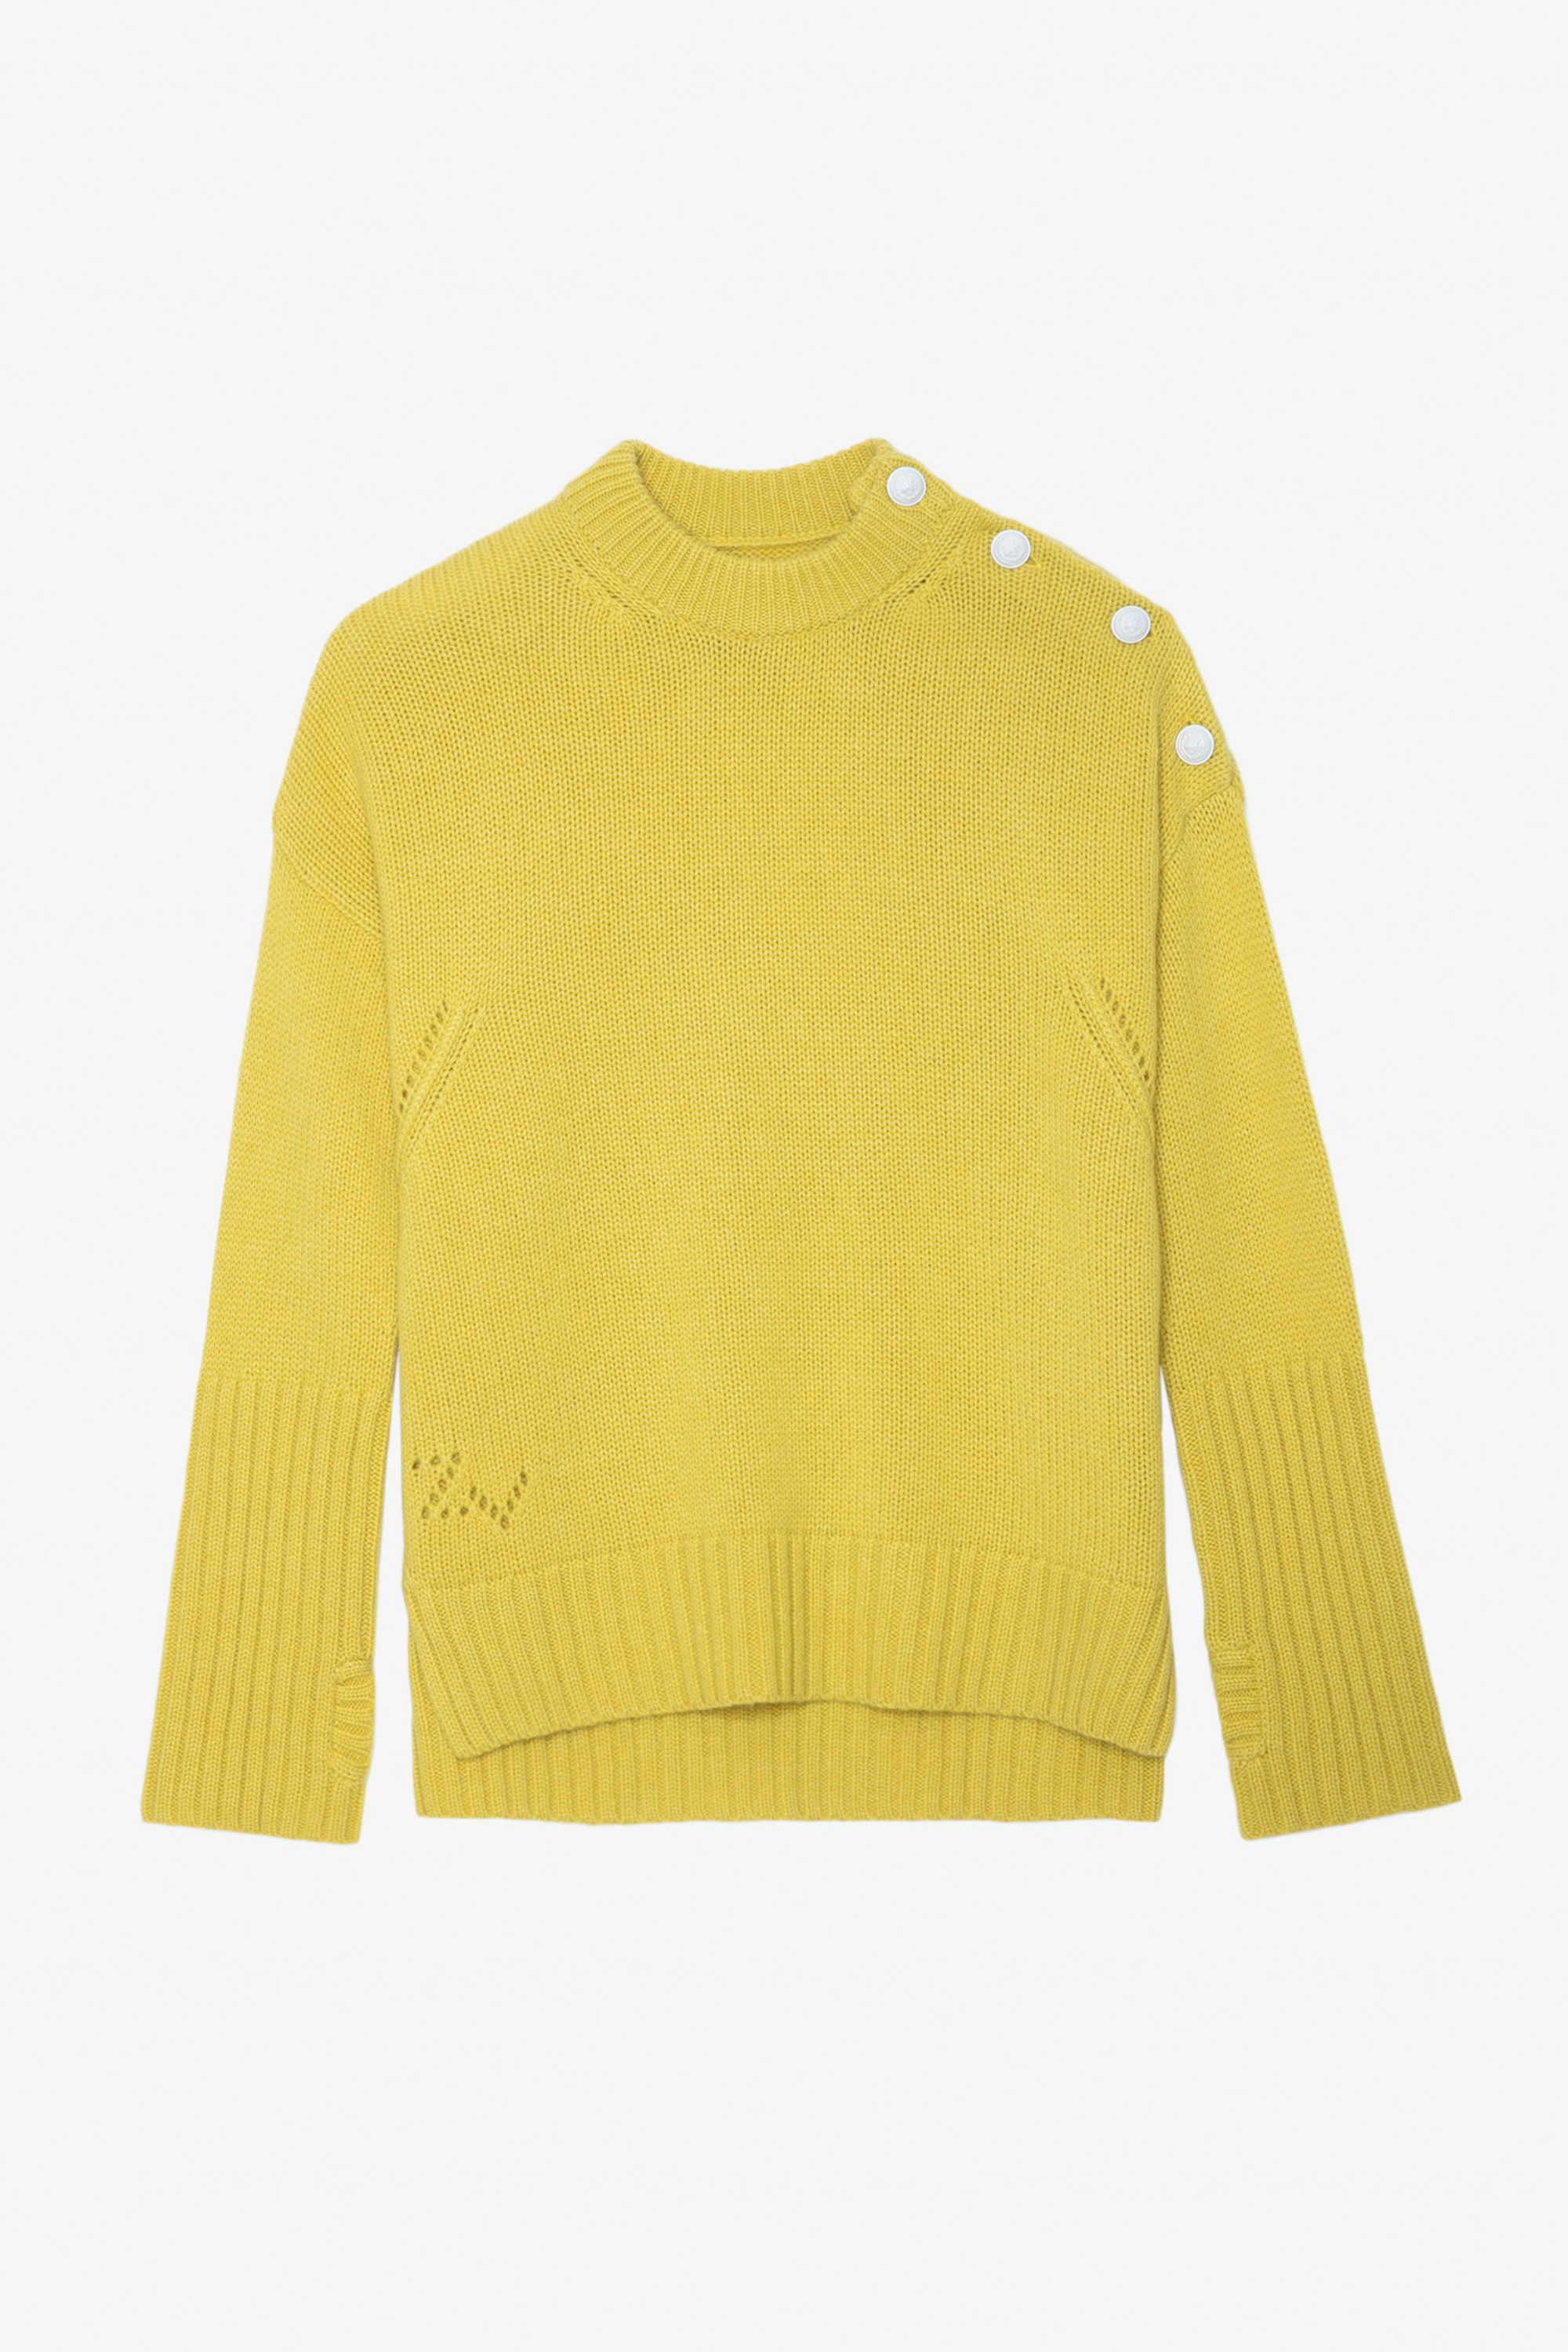 Malta カシミヤニット - Women’s yellow cashmere jumper with buttons on the shoulders.